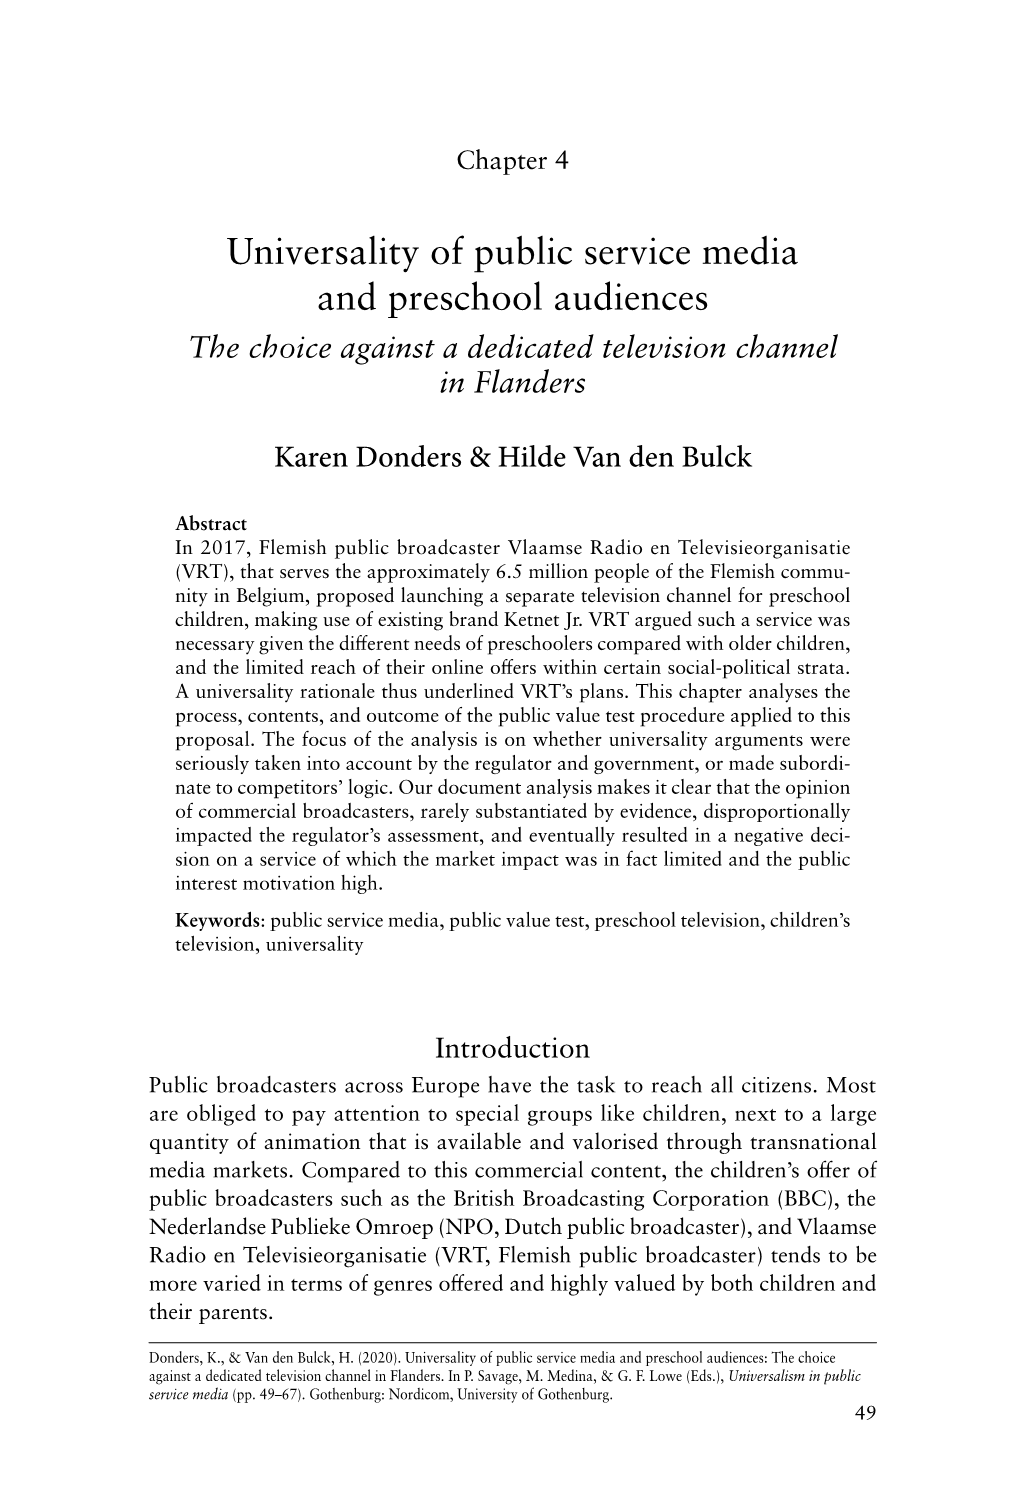 Universality of Public Service Media and Preschool Audiences the Choice Against a Dedicated Television Channel in Flanders